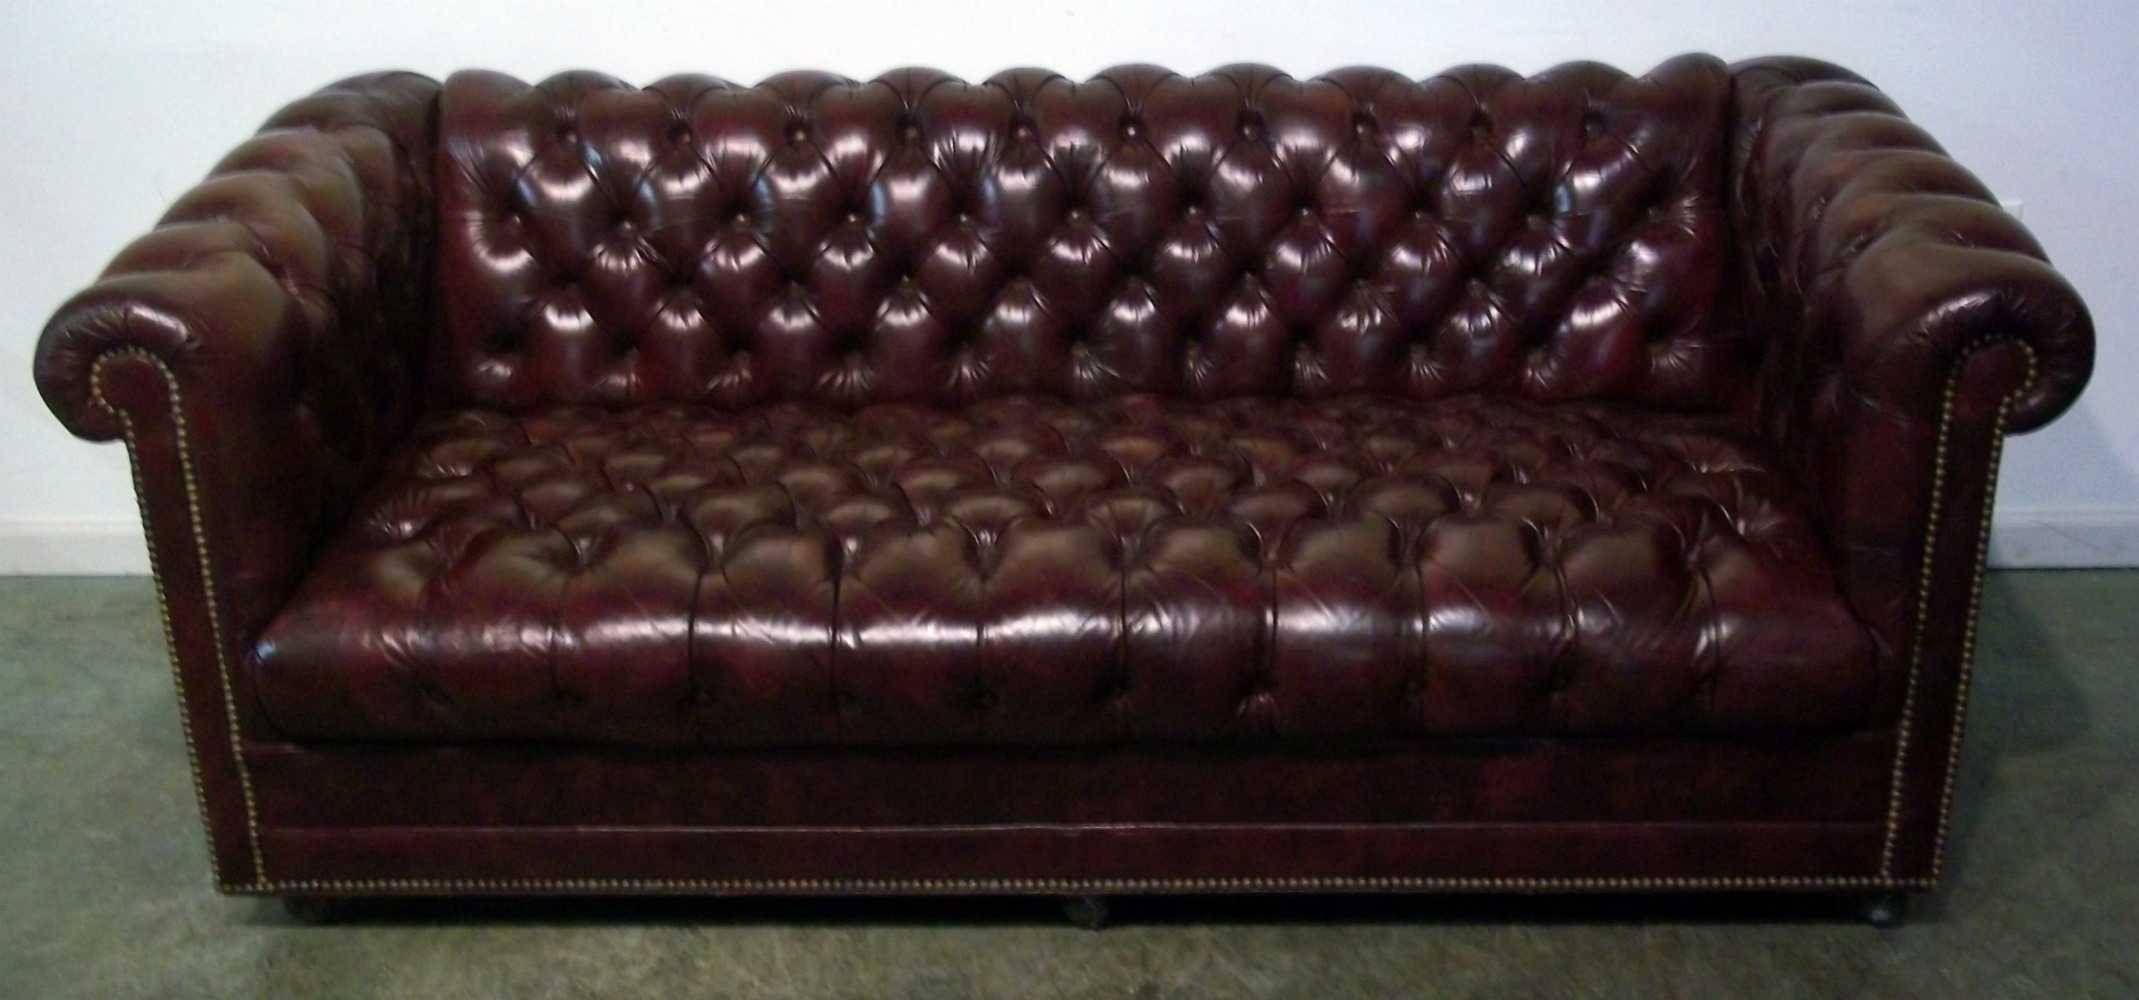 Furniture & Rug: Chic Ethan Allen Slipcovers For Seat Accessories Regarding Ethan Allen Chesterfield Sofas (View 7 of 15)